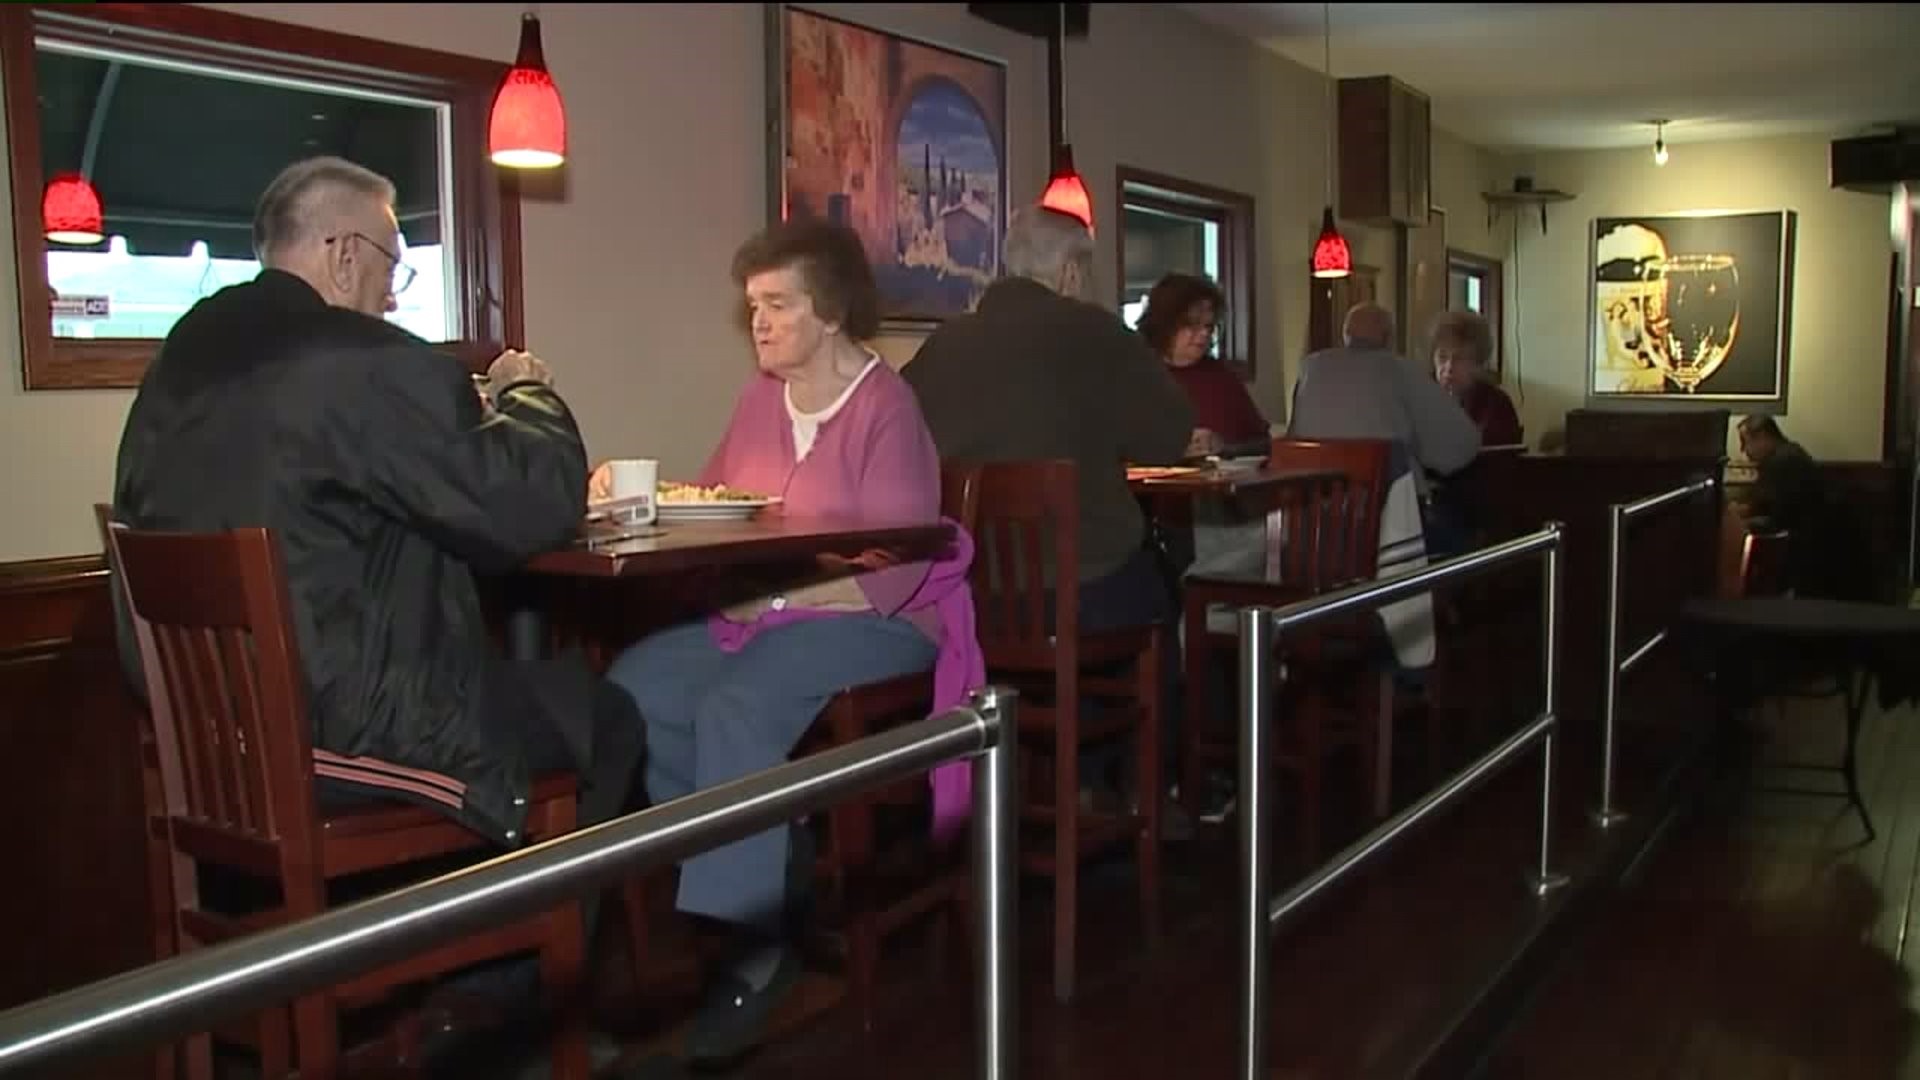 Veterans Treated to Free Meal at Restaurant in Wilkes-Barre